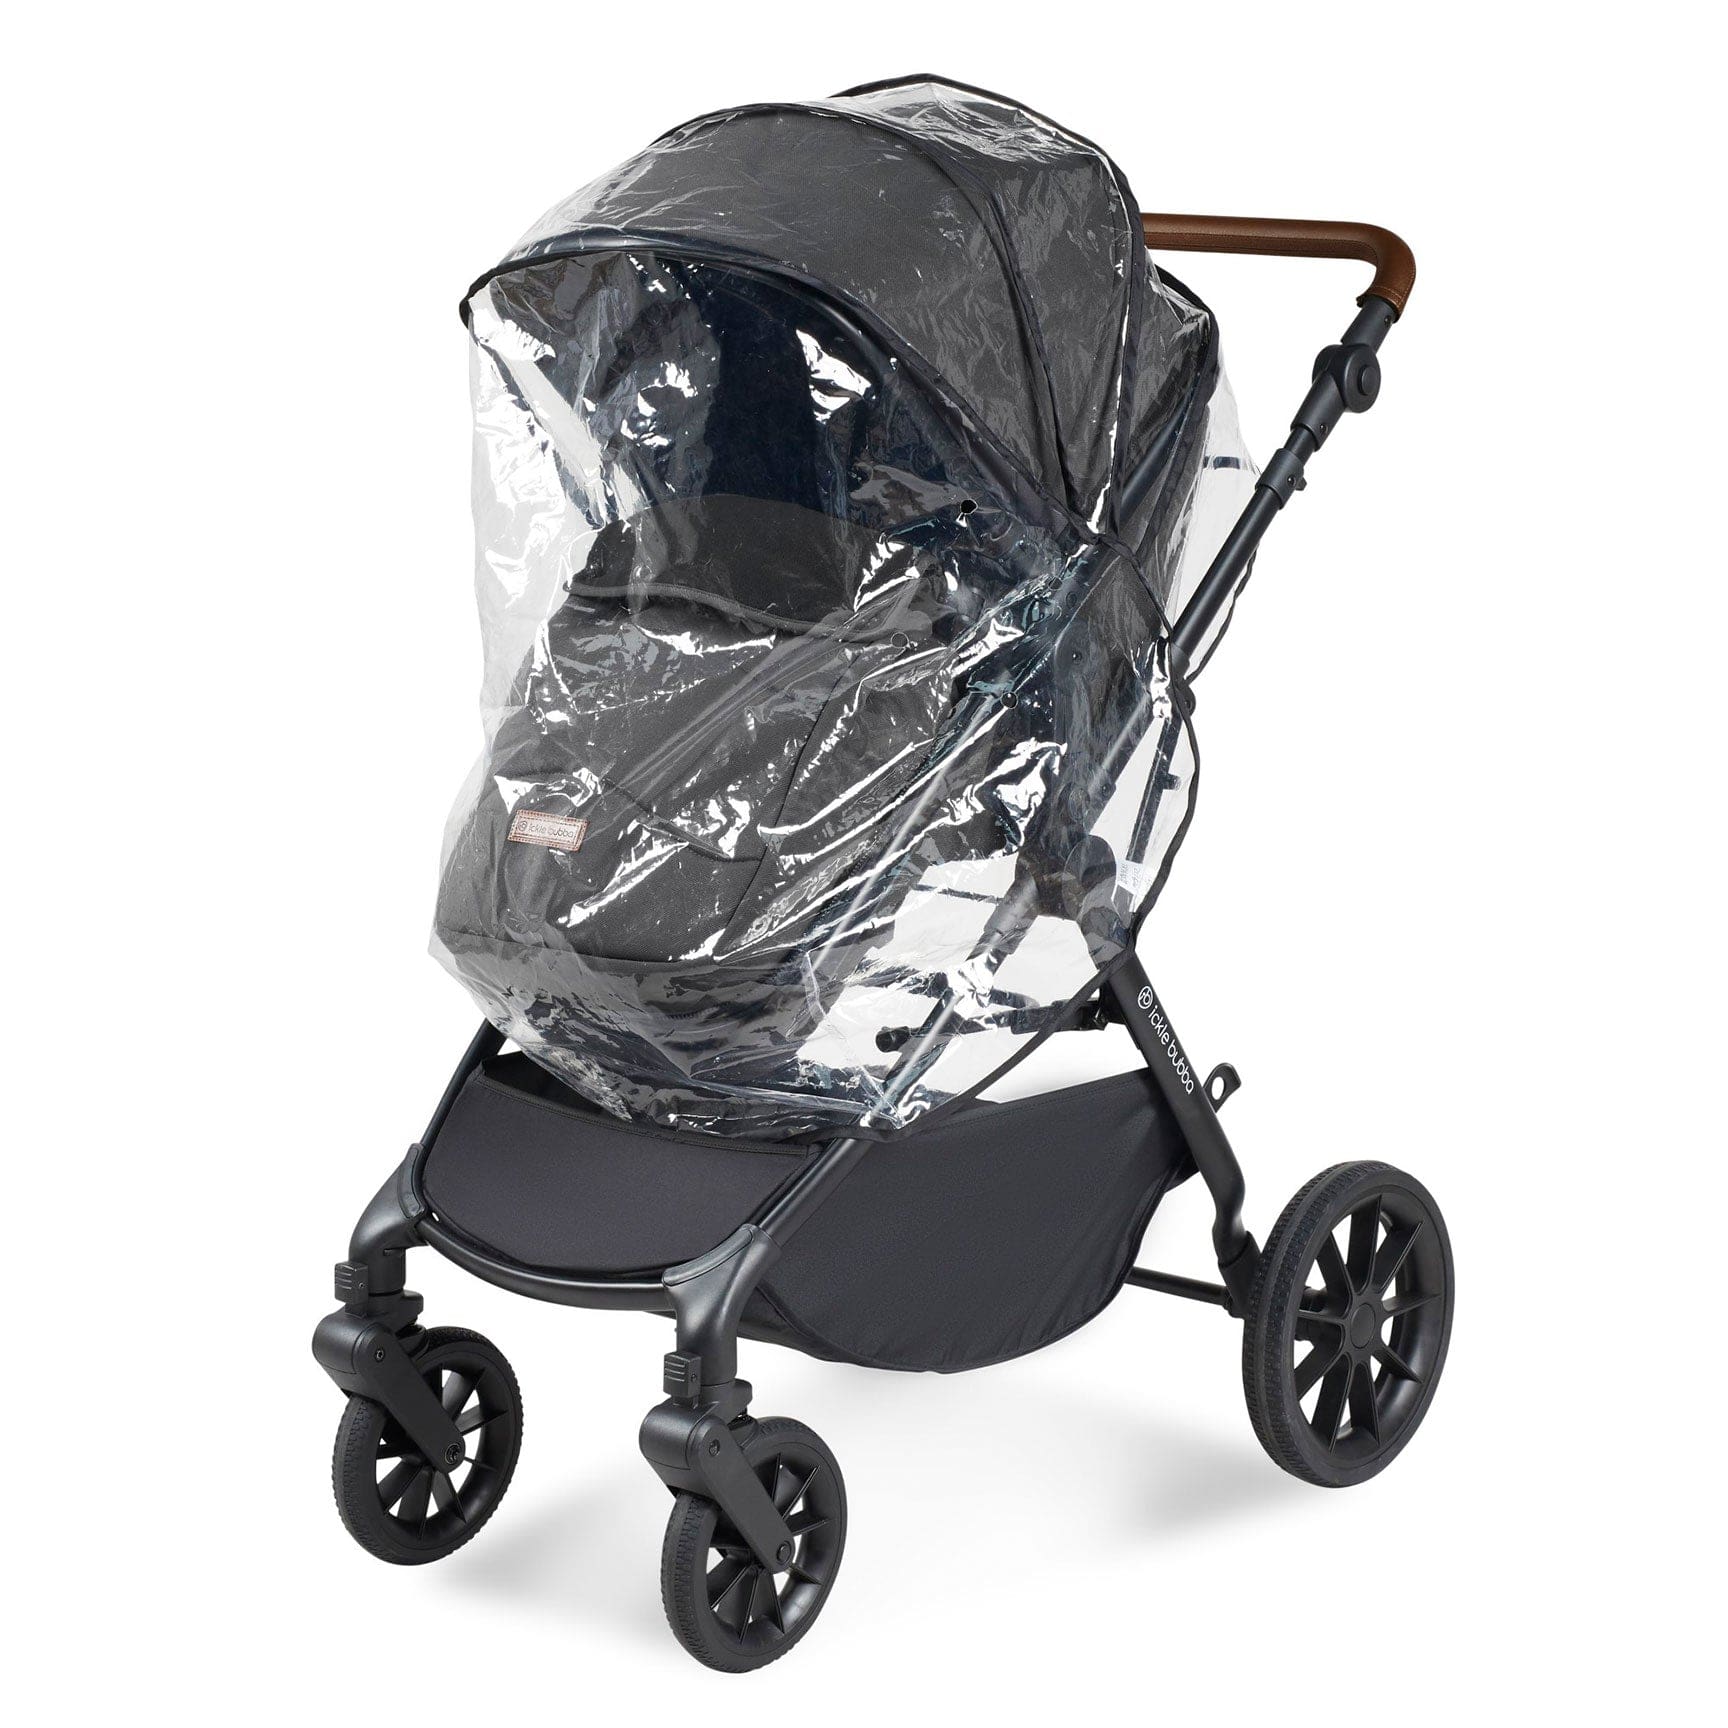 Ickle Bubba Cosmo All-in-One I-Size Travel System with Isofix Base in Black/Graphite Grey Travel Systems 10-007-300-007 5056515025842